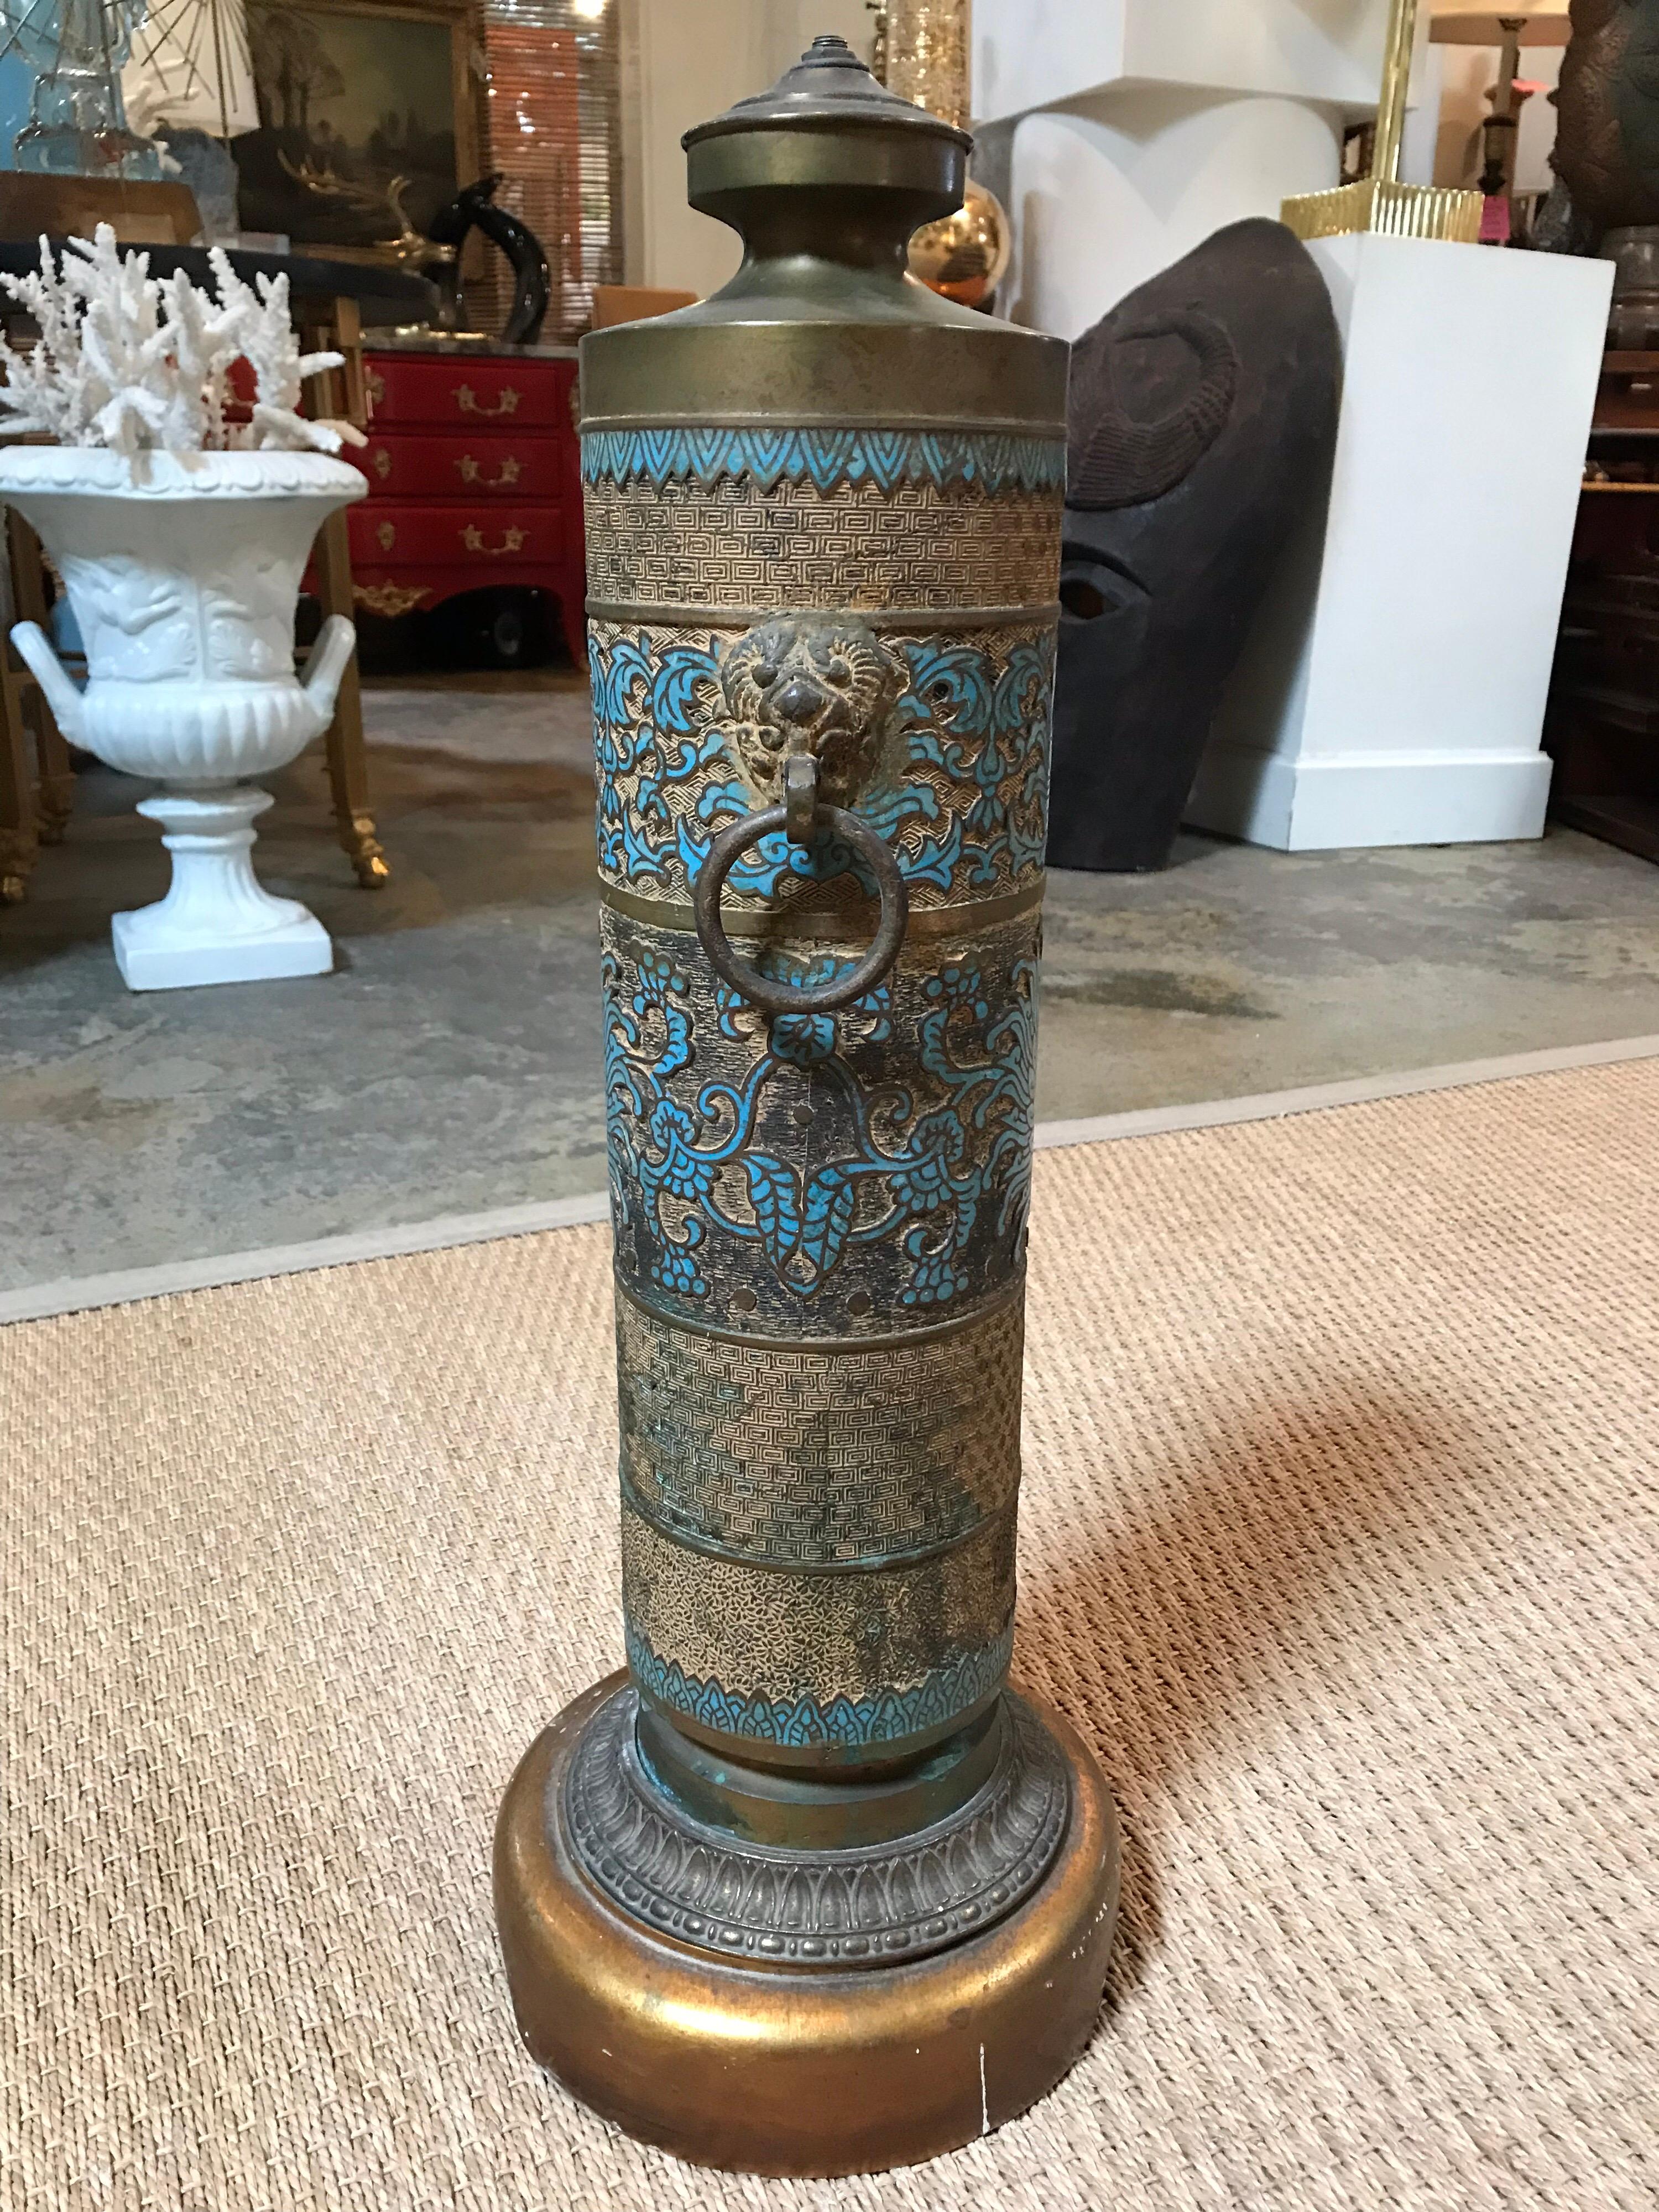 This ornate brass lamp stands as a single column with raised and lowered layers of patterns to decorate the outside. It's turquoise pattern adds a wonderful pop of color to the aesthetic. In need of new wiring.